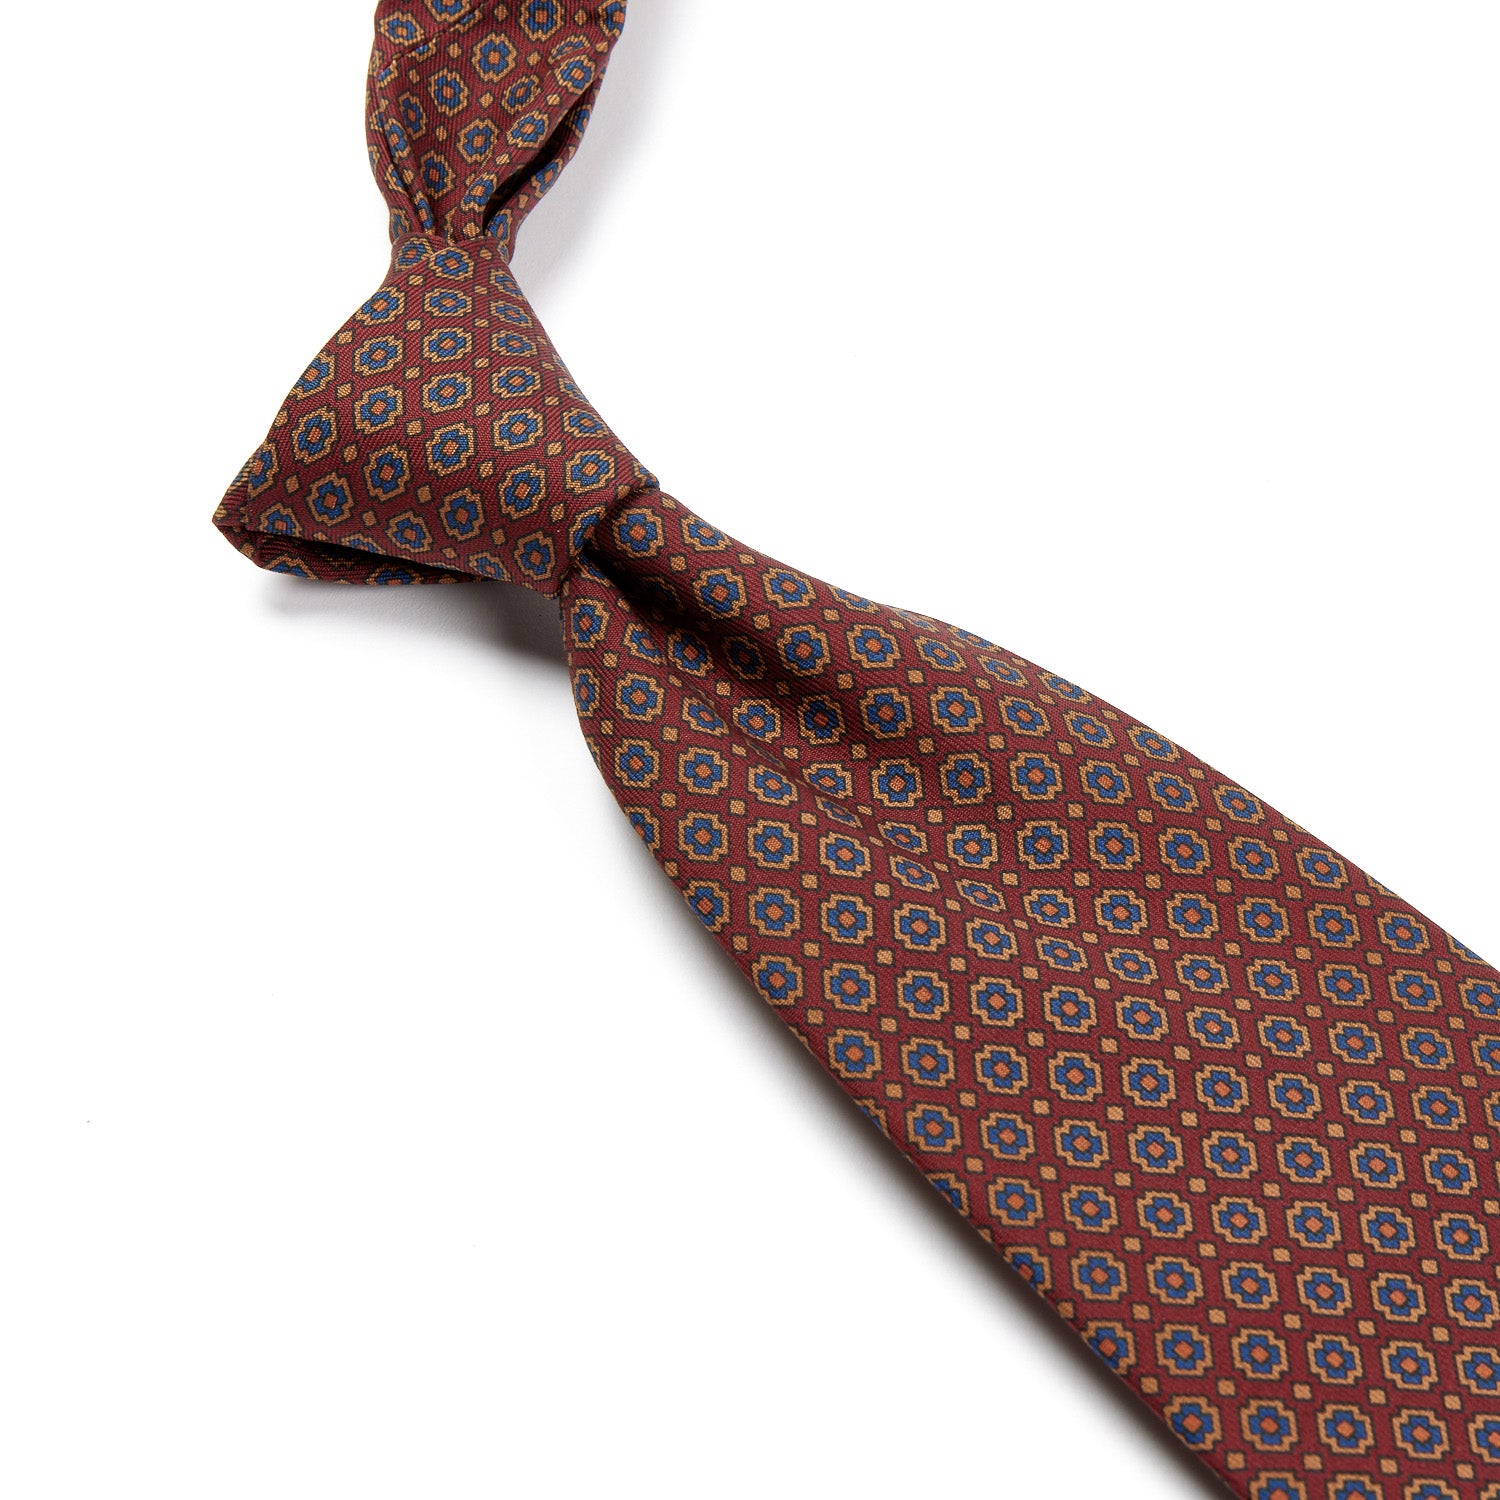 A handmade Kirby Allison Sovereign Grade Rust Small Floral Ancient Madder Tie with a circular pattern on a white background, showcasing the highest quality craftsmanship from the United Kingdom, available at KirbyAllison.com.